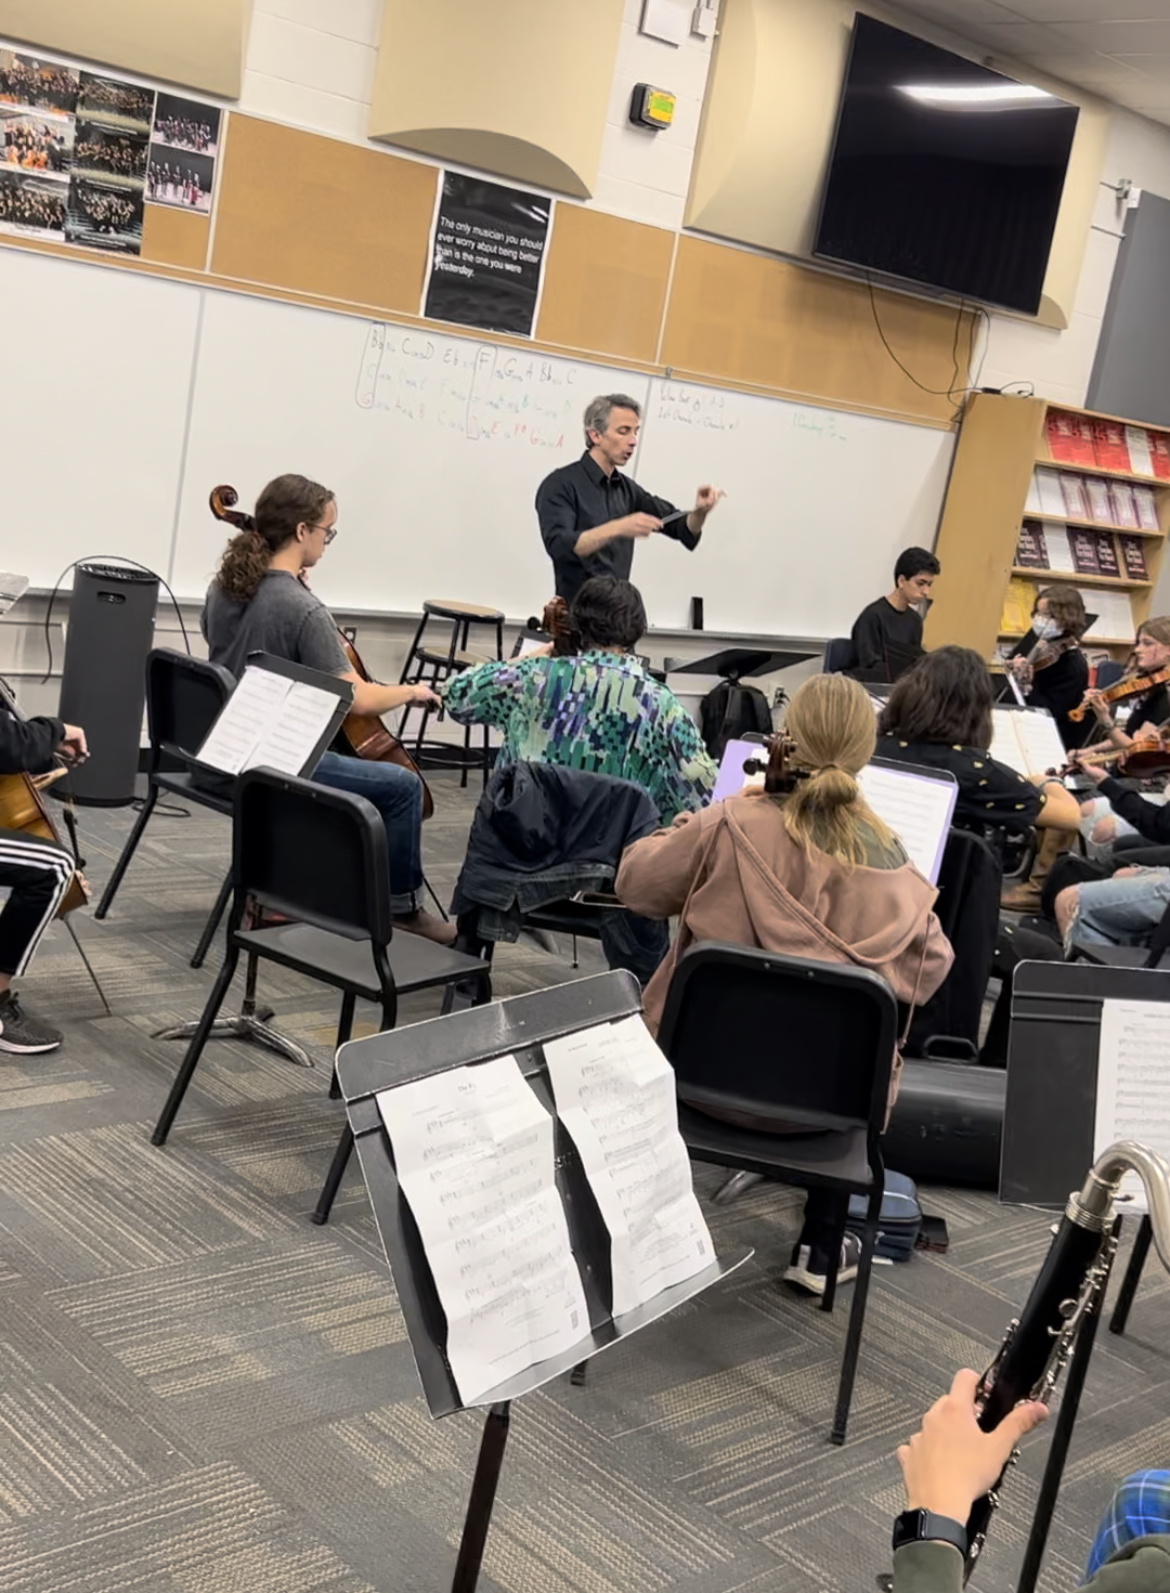 Pictured are GCVI Orchestra students during a workshop